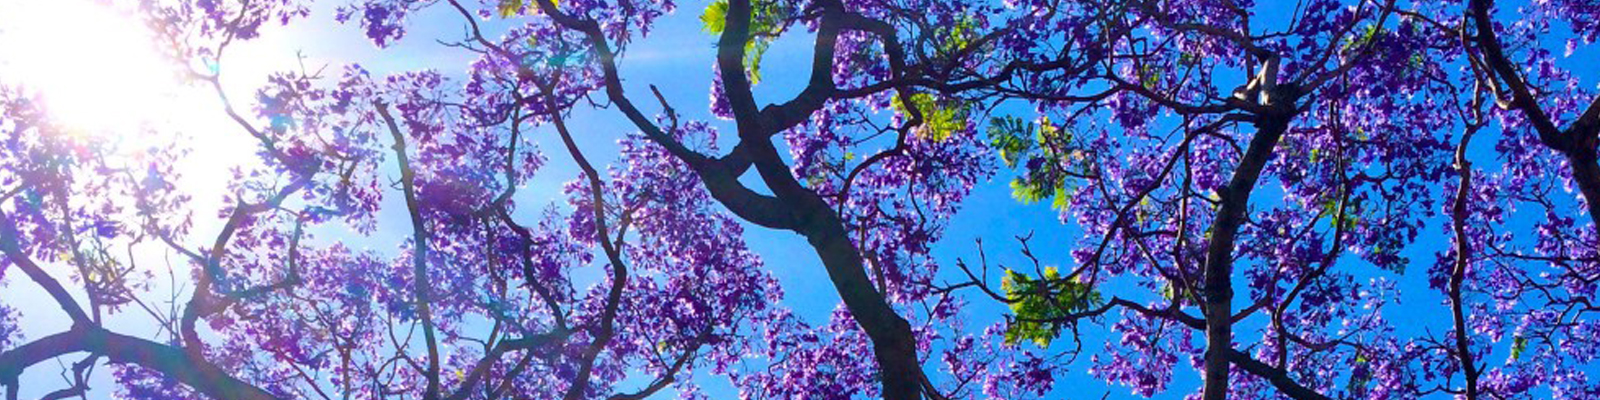 Lessons from my kids #1: Jacarandas are enough